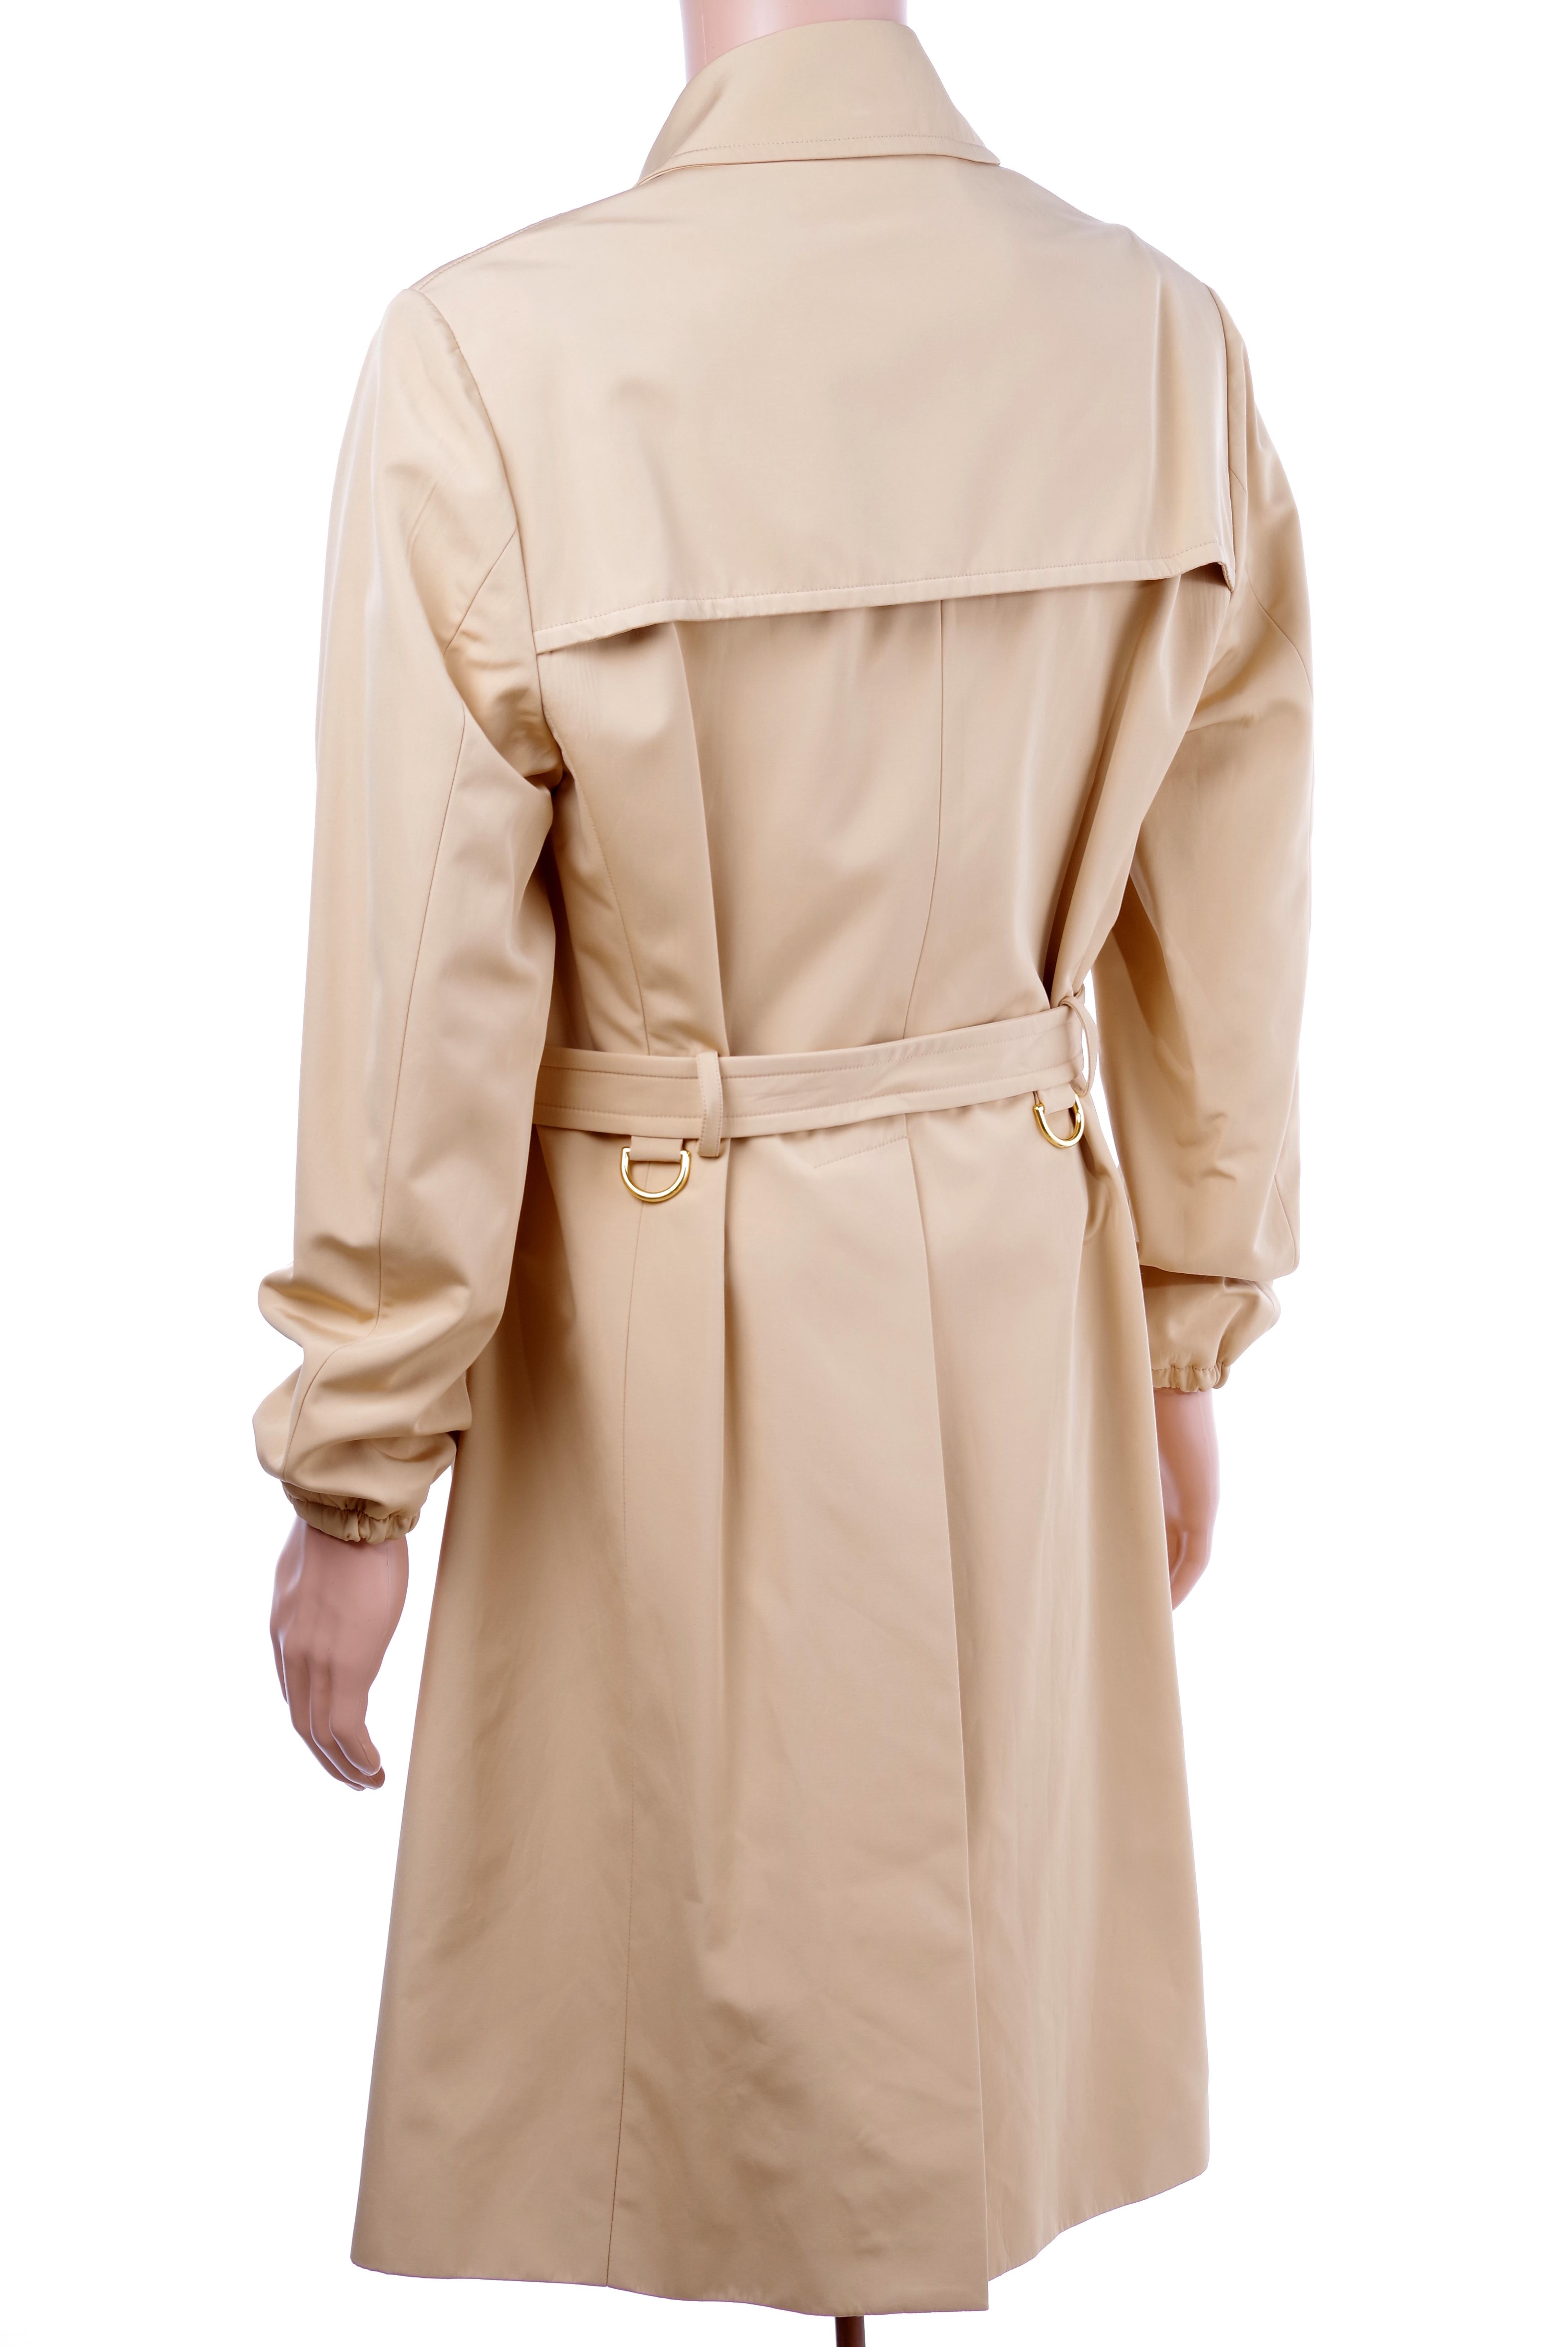 VERSACE TRENCH COAT for MEN


Color: Tan
52% viscose 30% polyester 18% cotton
Gold Medusa buttons
Belt

Elastic cuffs

Two pockets
Very comfortable and extremely luxurious! 

Italian size 50, US 40

 Brand new, with tags.
